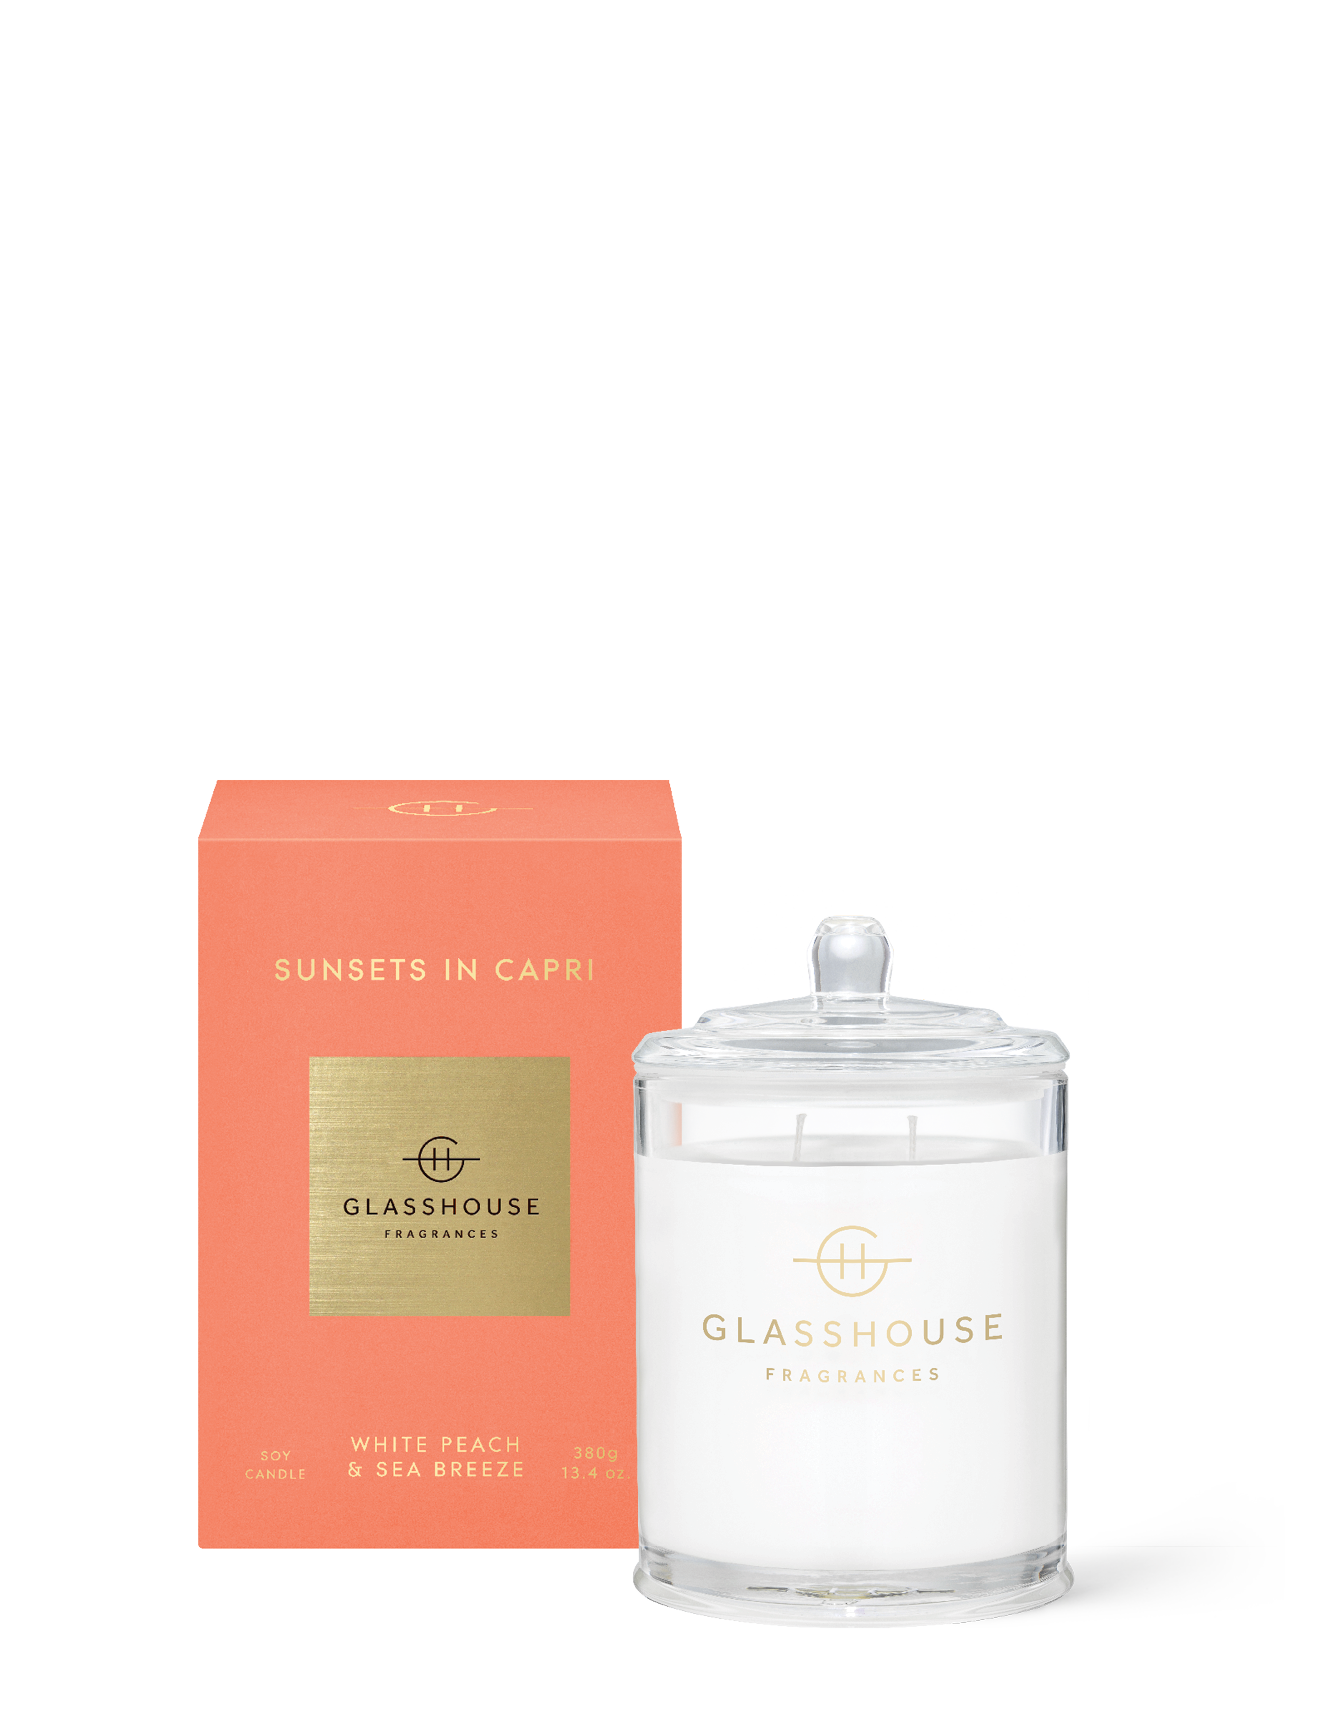 Sunsets in Capri 380g Soy Candle